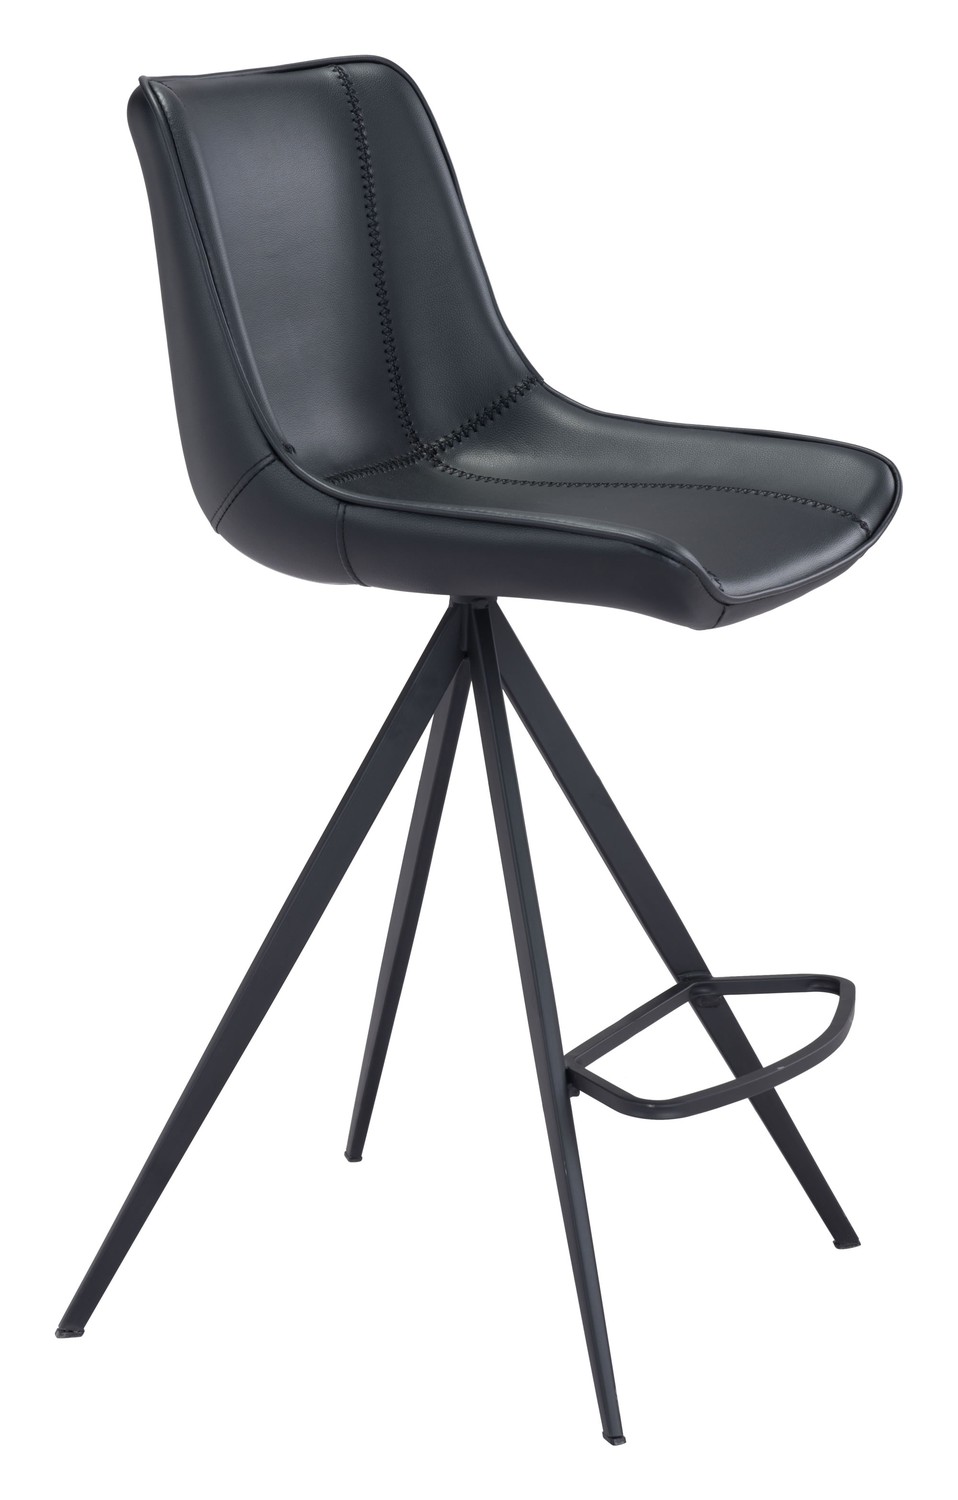 19.3" x 21.7" x 39" Black, Leatherette, Stainless Steel, Counter Chair - Set of 2